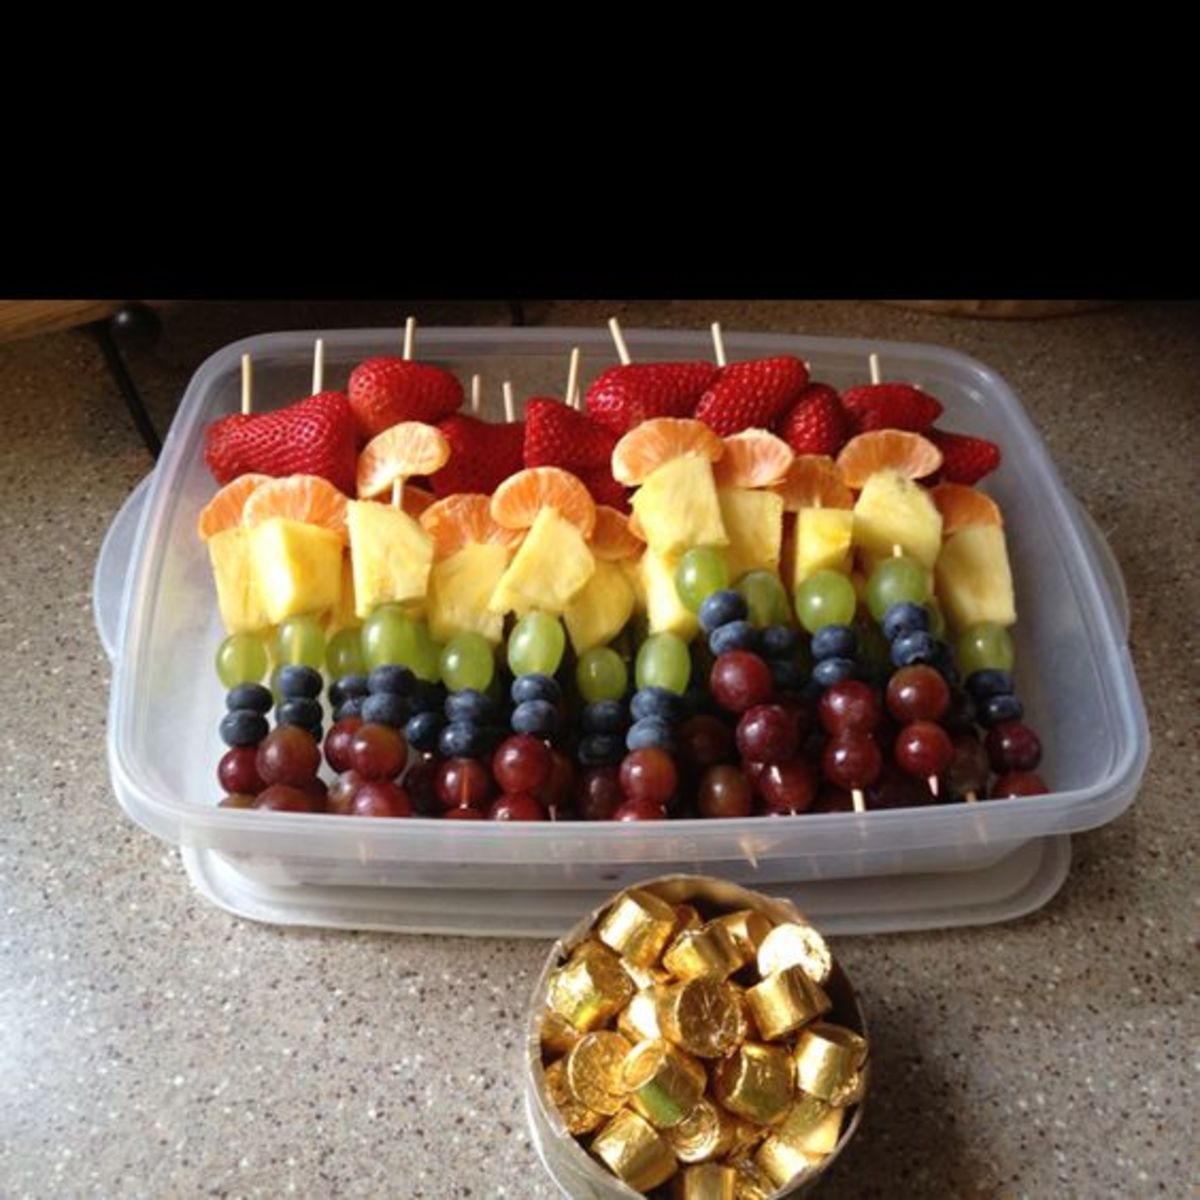 Rainbow Fruit Kebabs With Pot of Gold Chocolates